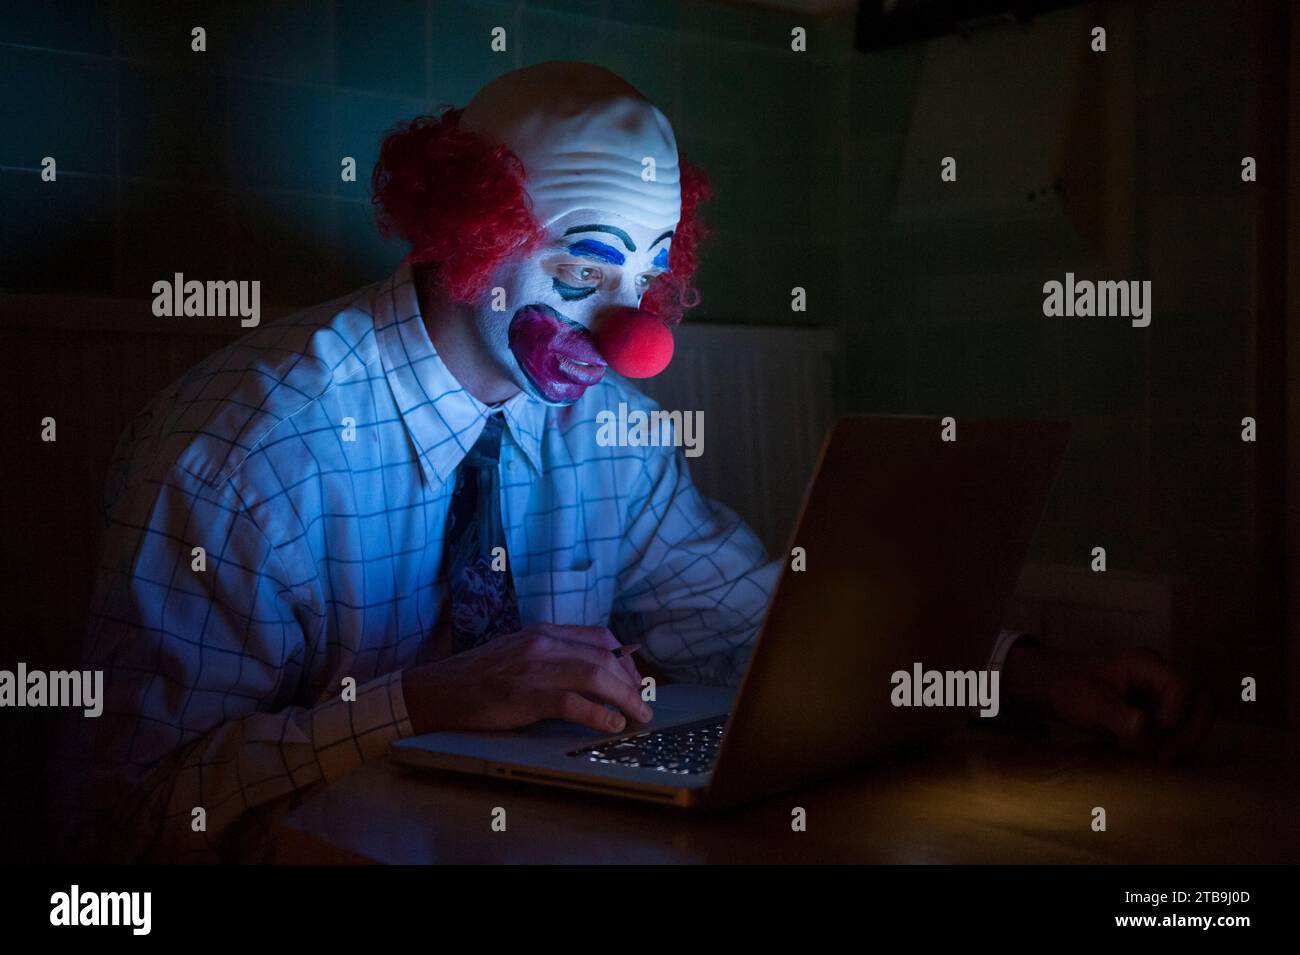 Clown wearing a shirt and tie uses a laptop computer to surf the web; Lincoln, Nebraska, United States of America Stock Photo